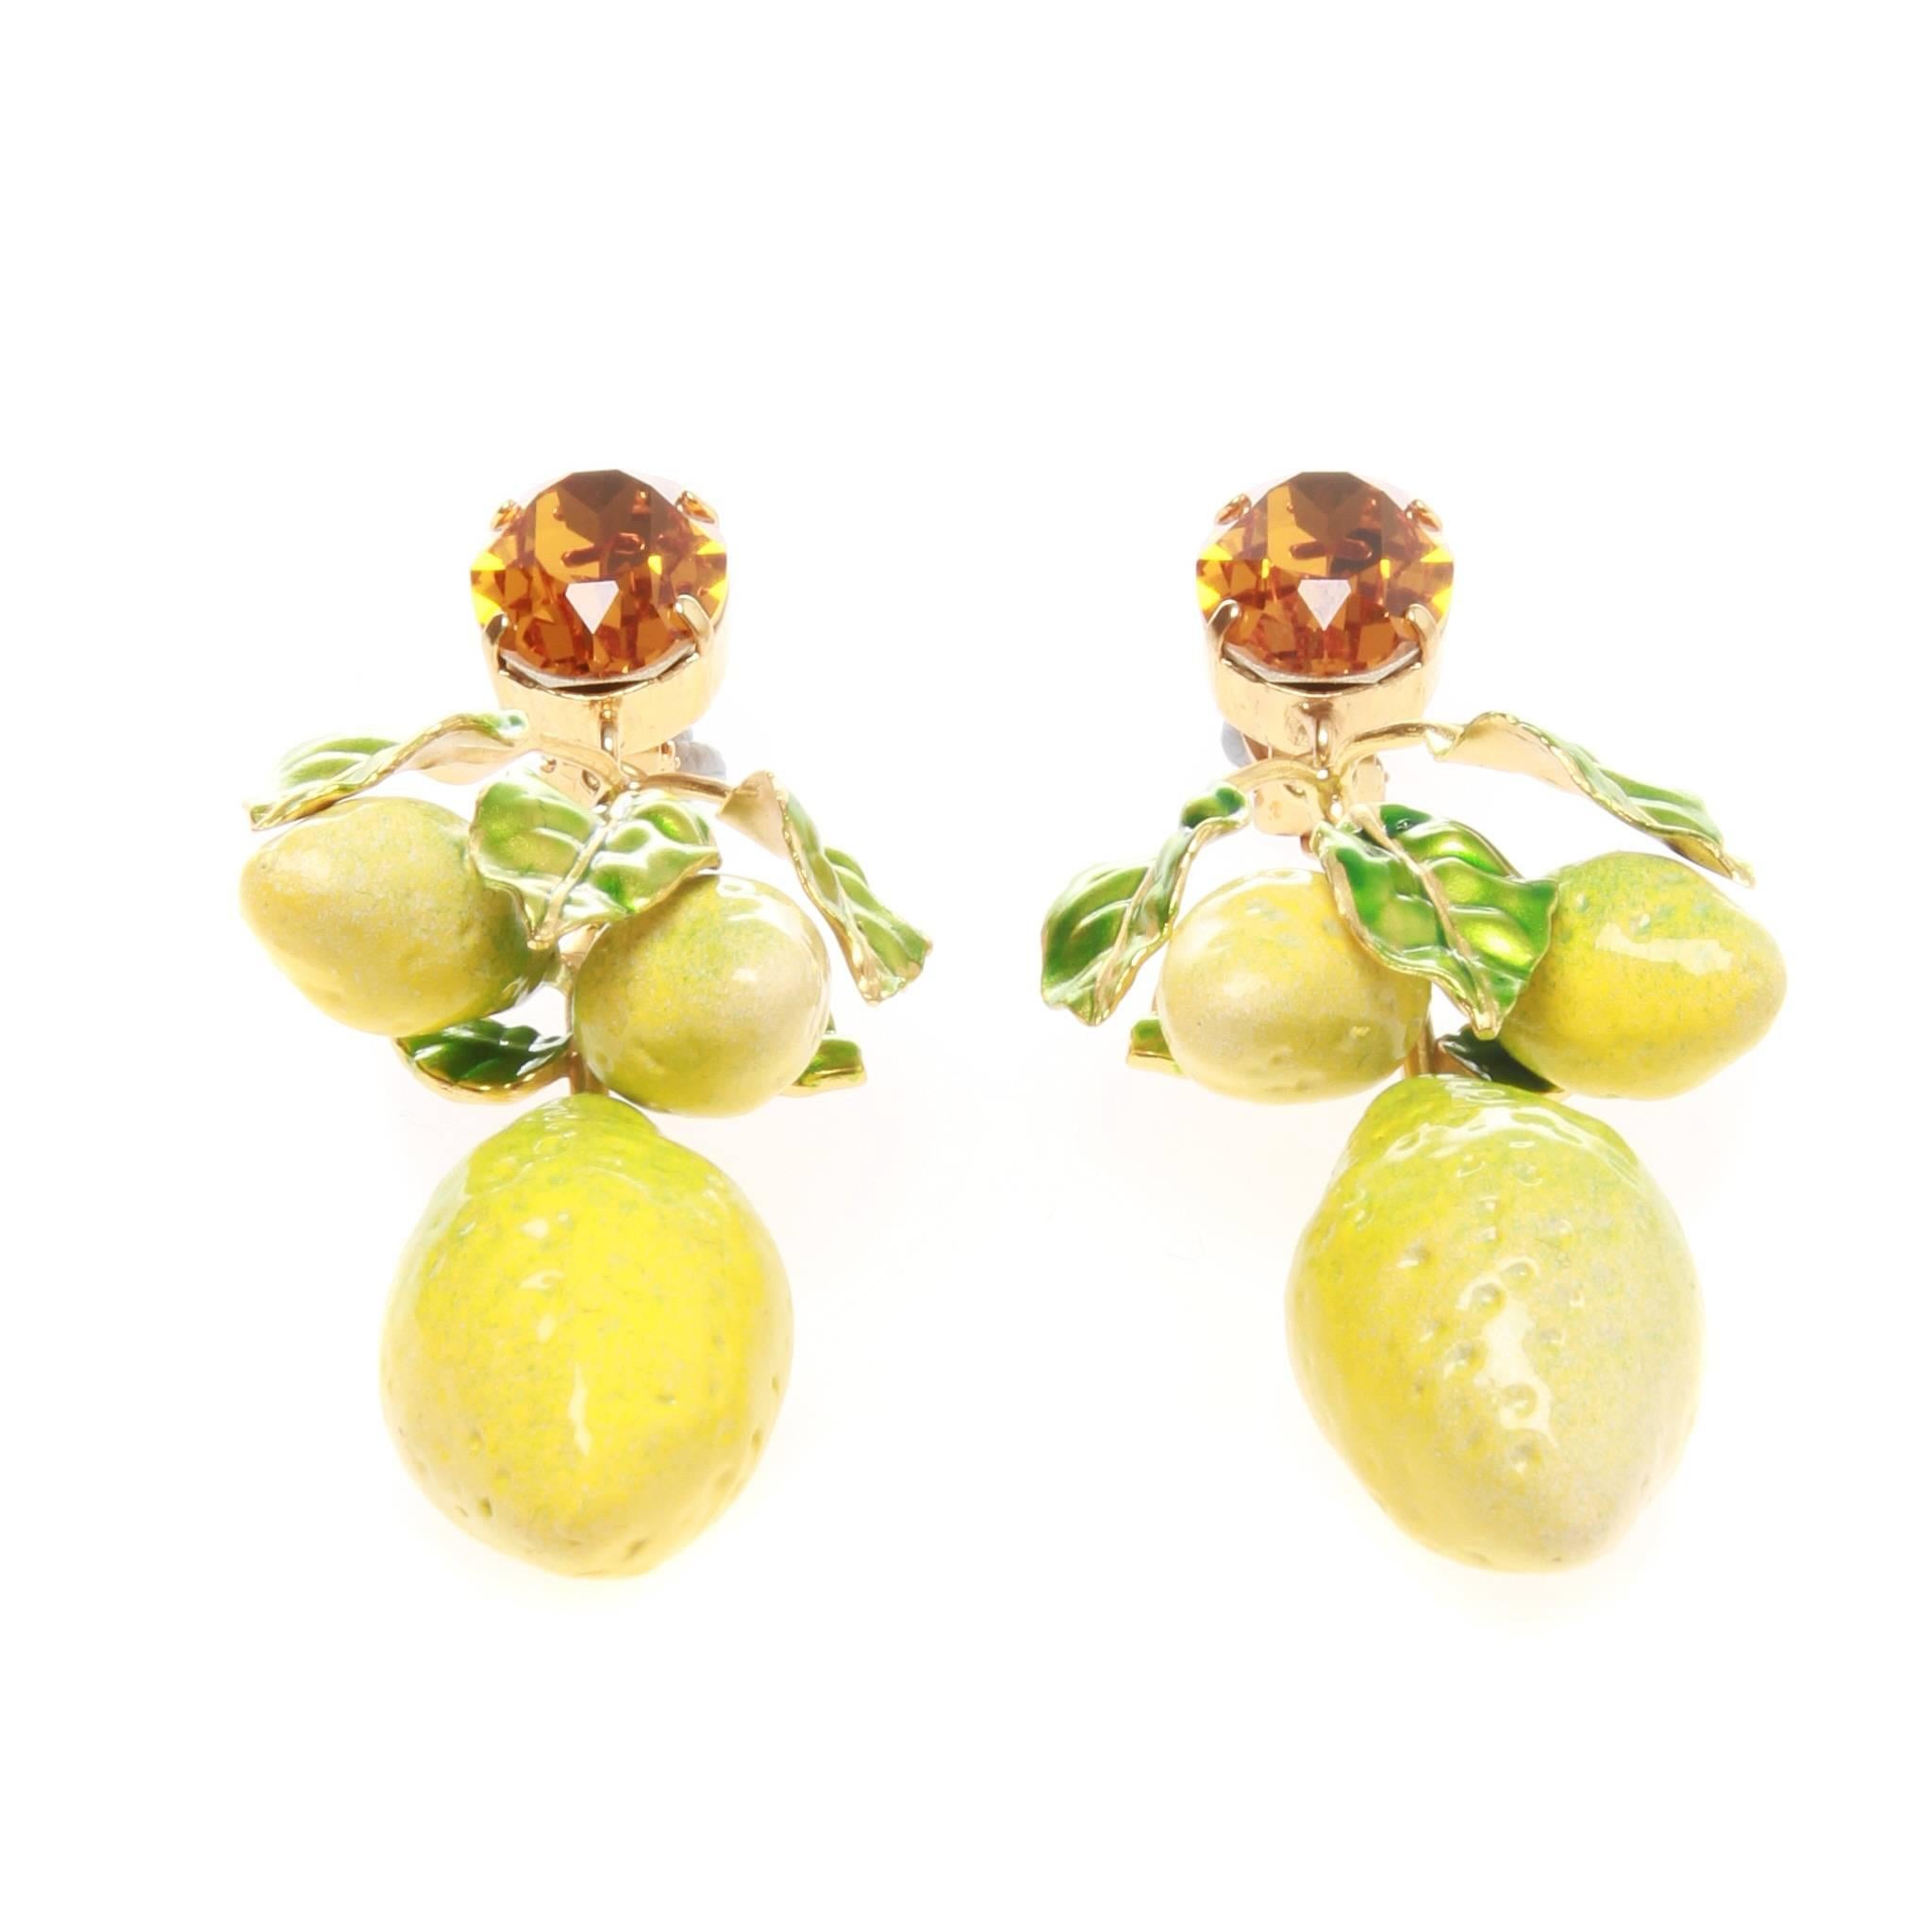 RTW Spring 2016 yellow crystal and gold-finish brass lemon drop clip-on earrings from Dolce & Gabbana featuring an amber Swarovski crystal and hanging green resin leaves with bright yellow enamel fruits. These earrings come as a pair and exude